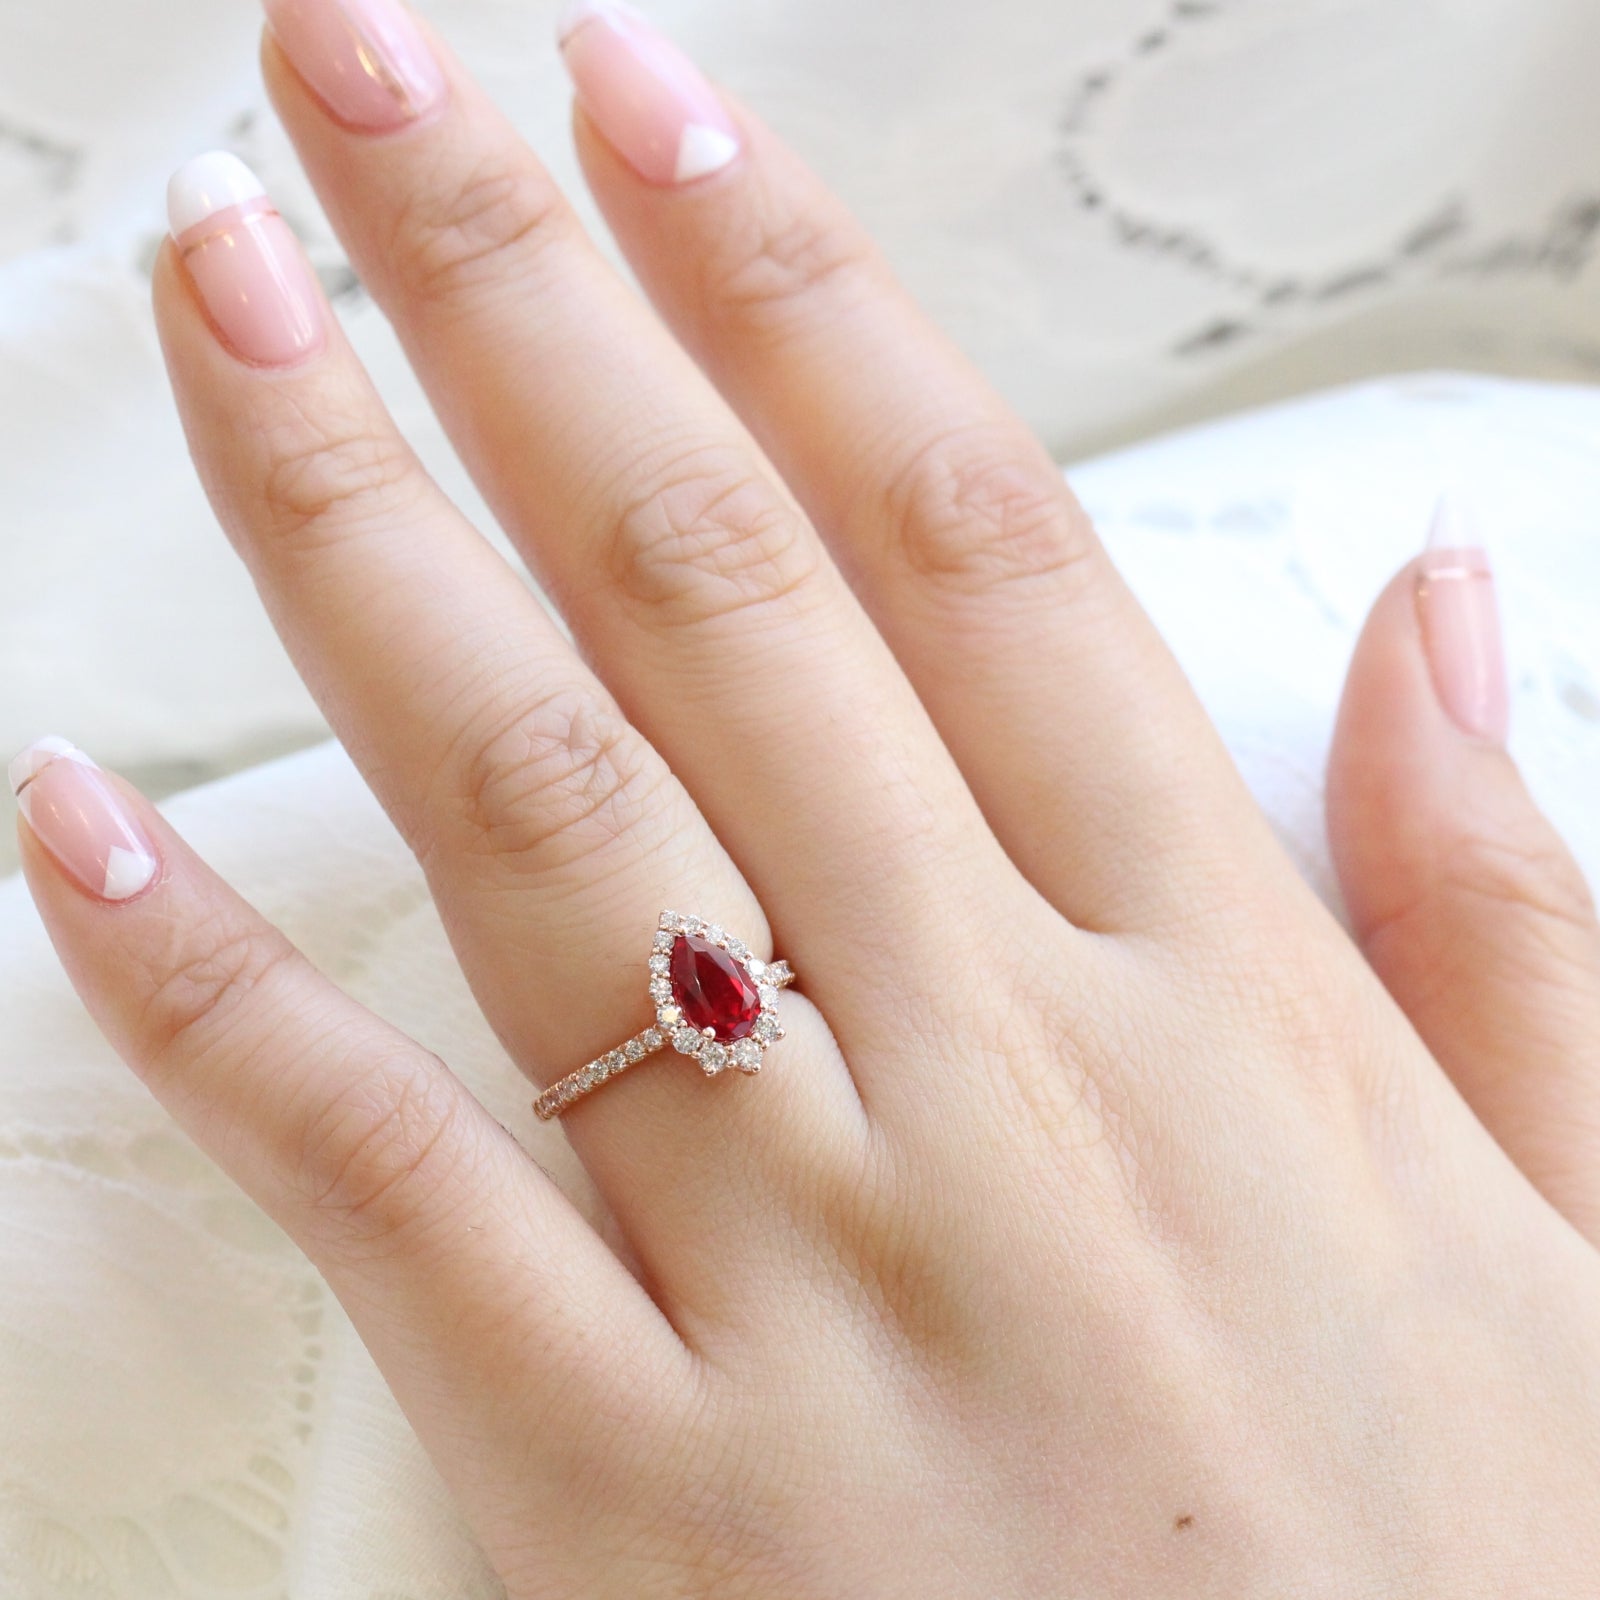 pear shaped ruby engagement ring rose gold halo diamond ring low profile ring by la more design jewelry